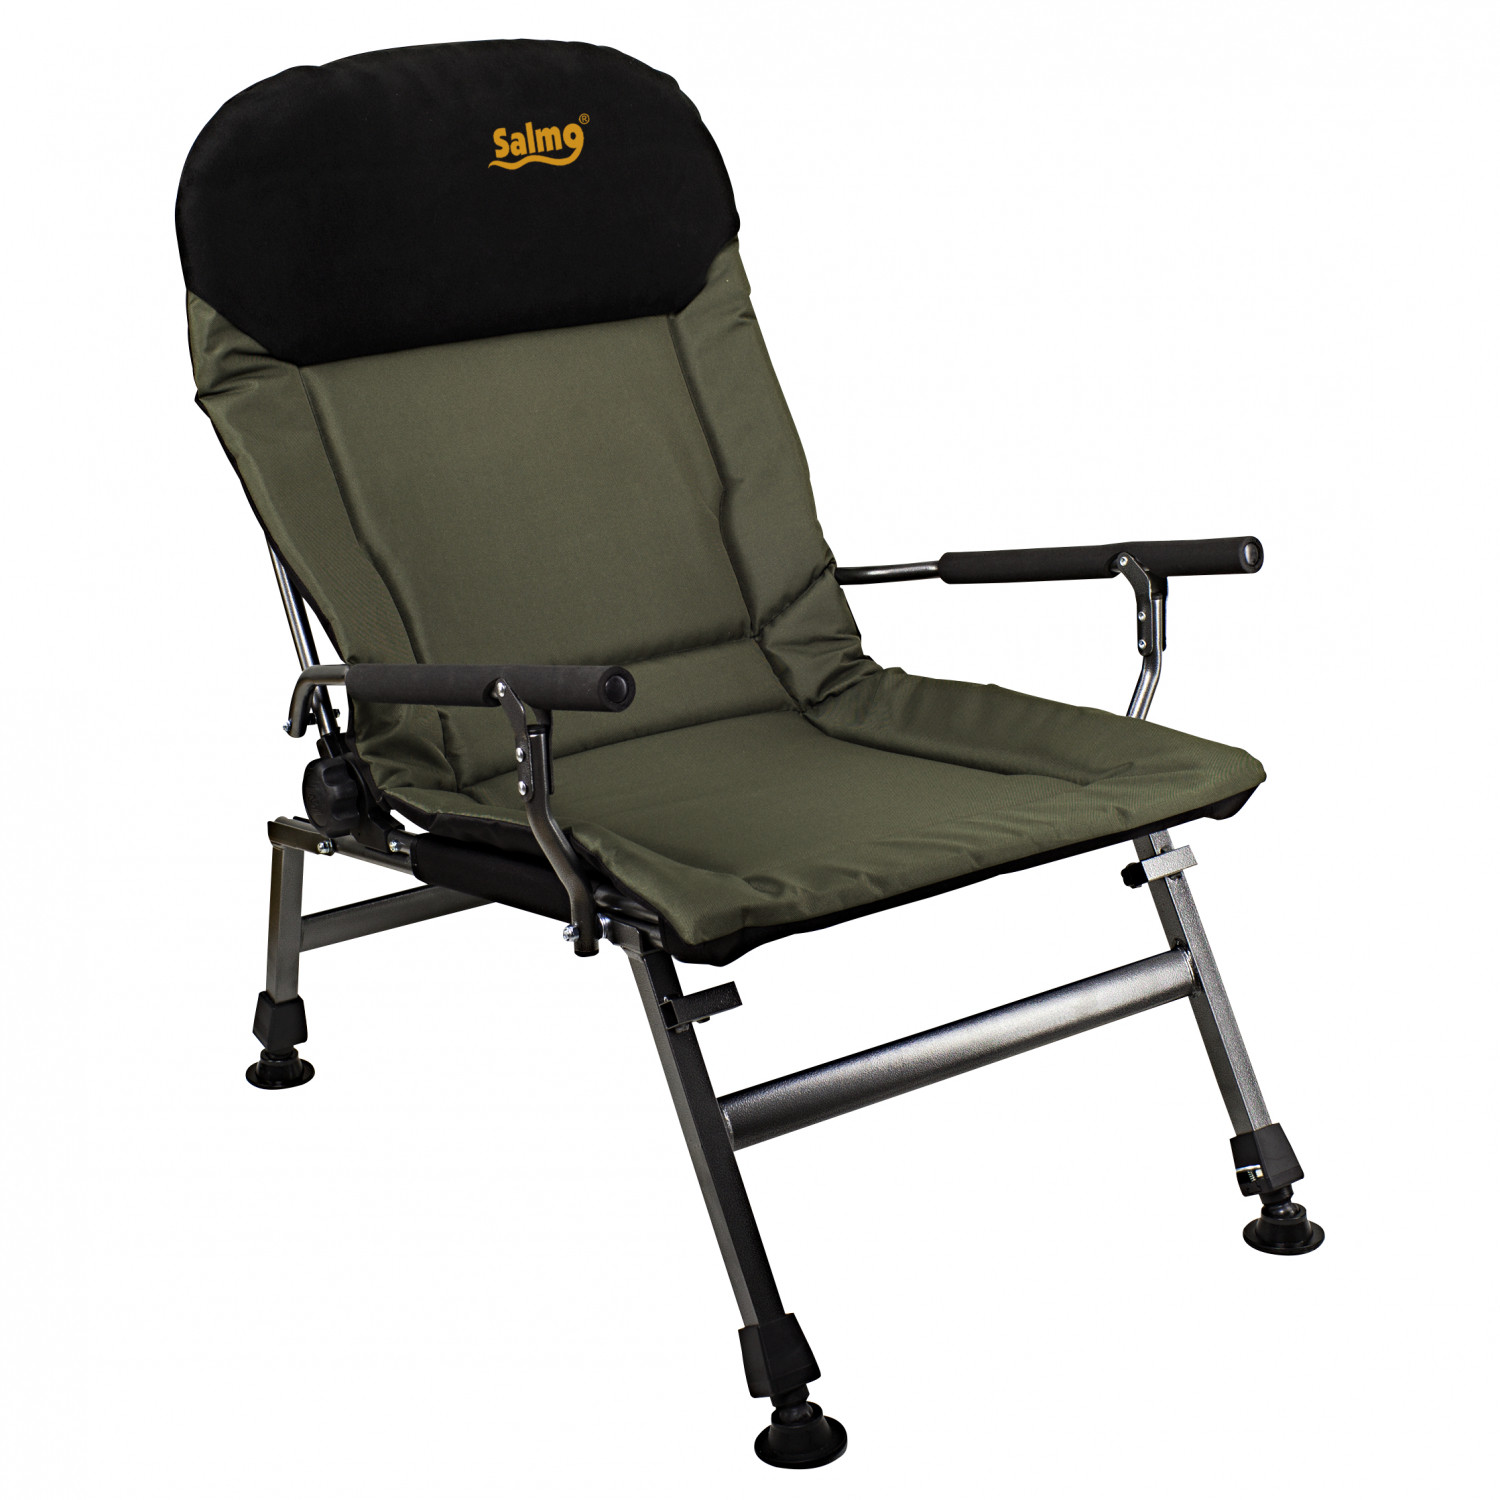 Salmo Carp Chair at low prices